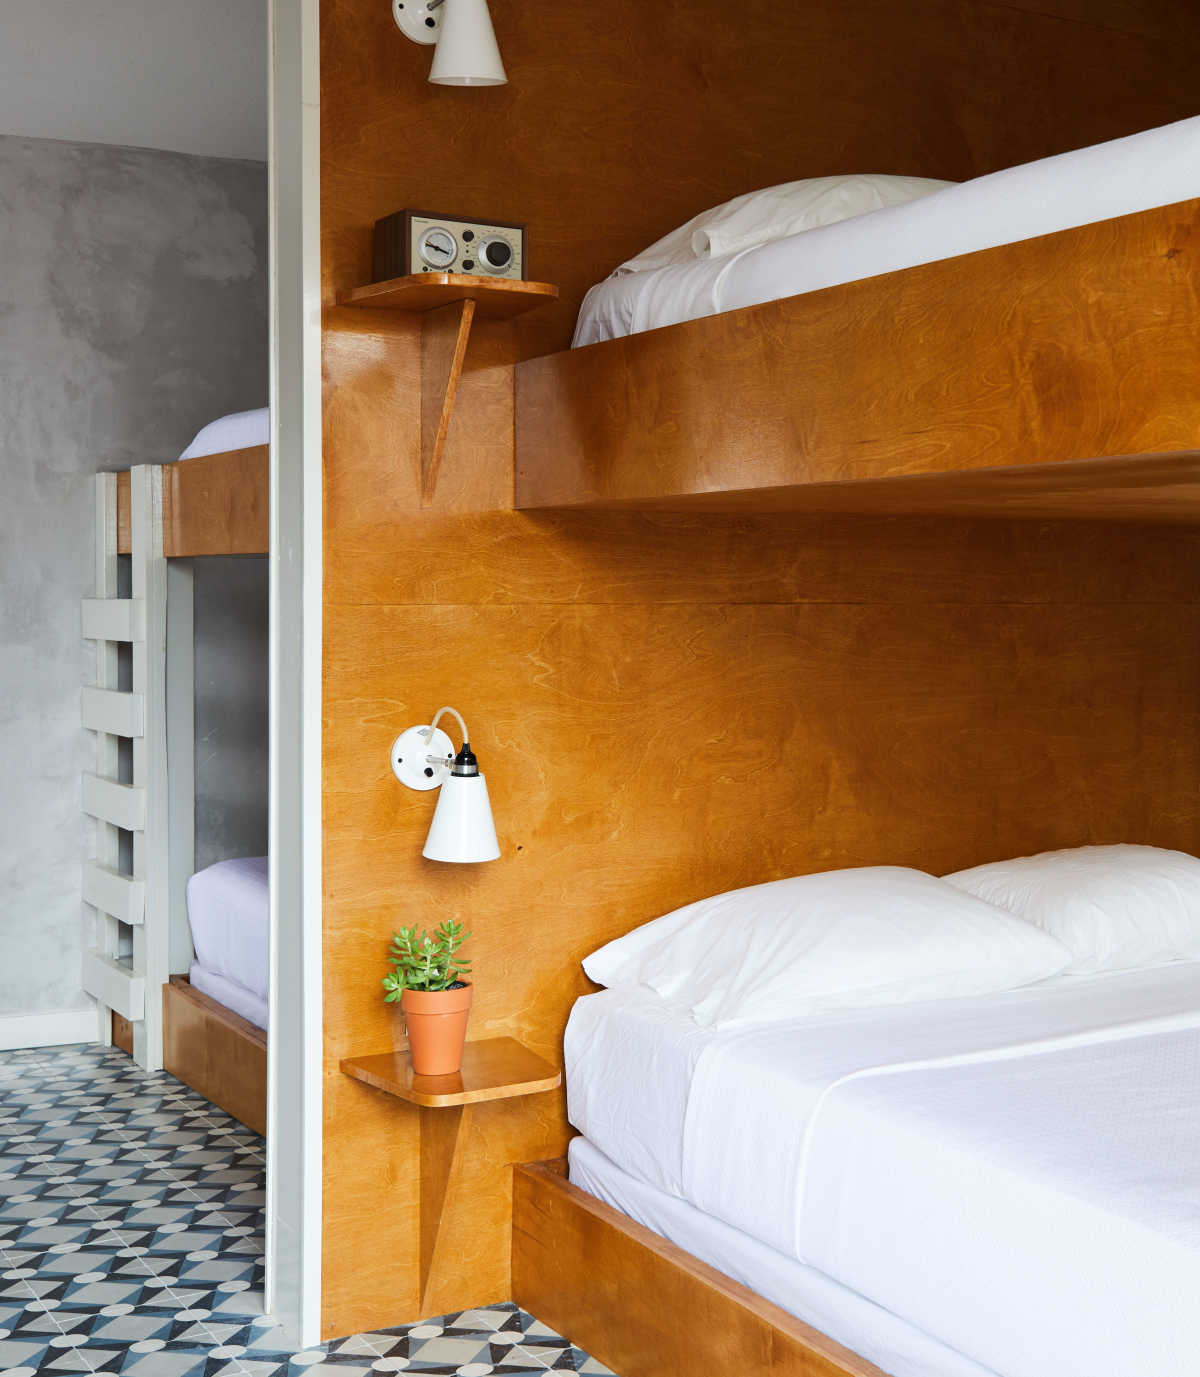 Modern Bunk Beds, Hotels With Bunk Beds